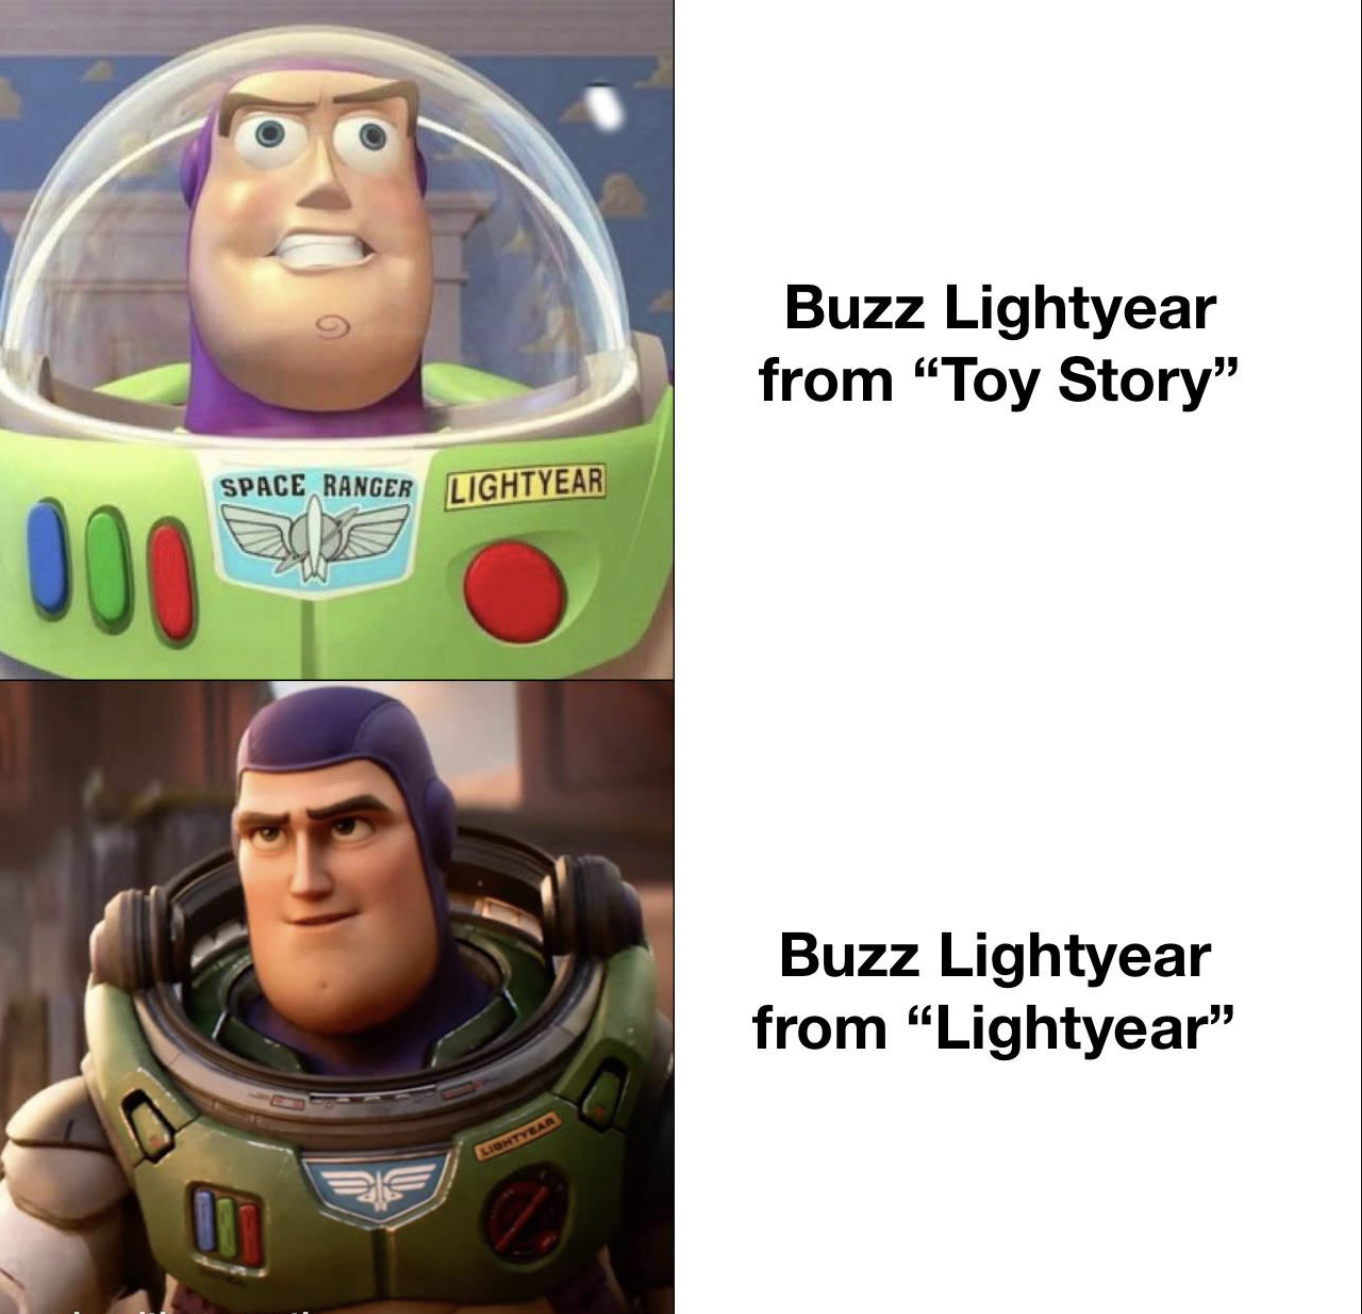 Anti-Memes - Tell the Truth - buzz lightyear glow up - Space Ranger Lightyear